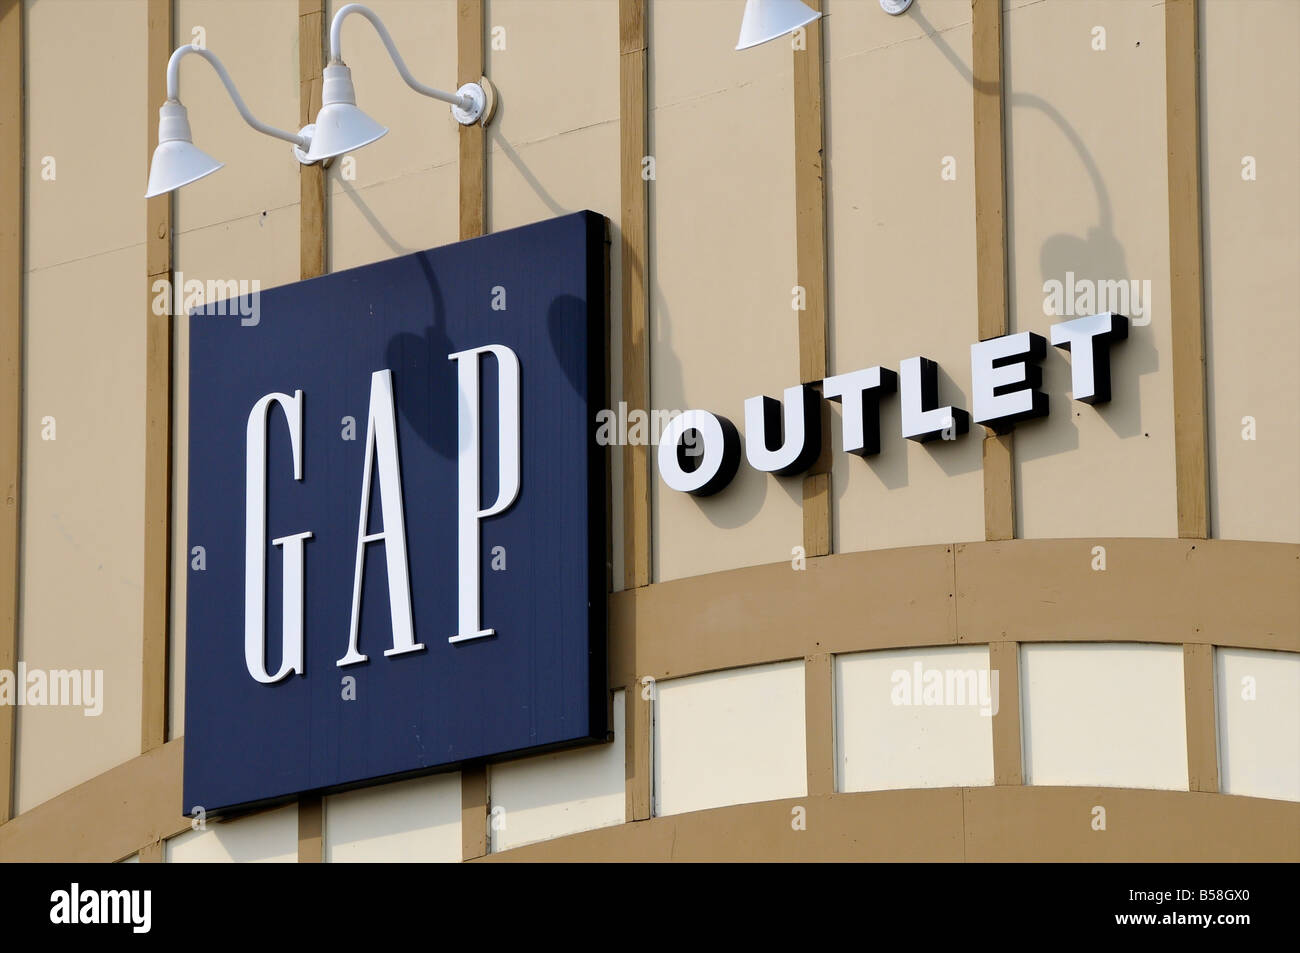 Gap factory outlet store, North Conway, New Hampshire, USA Banque D'Images